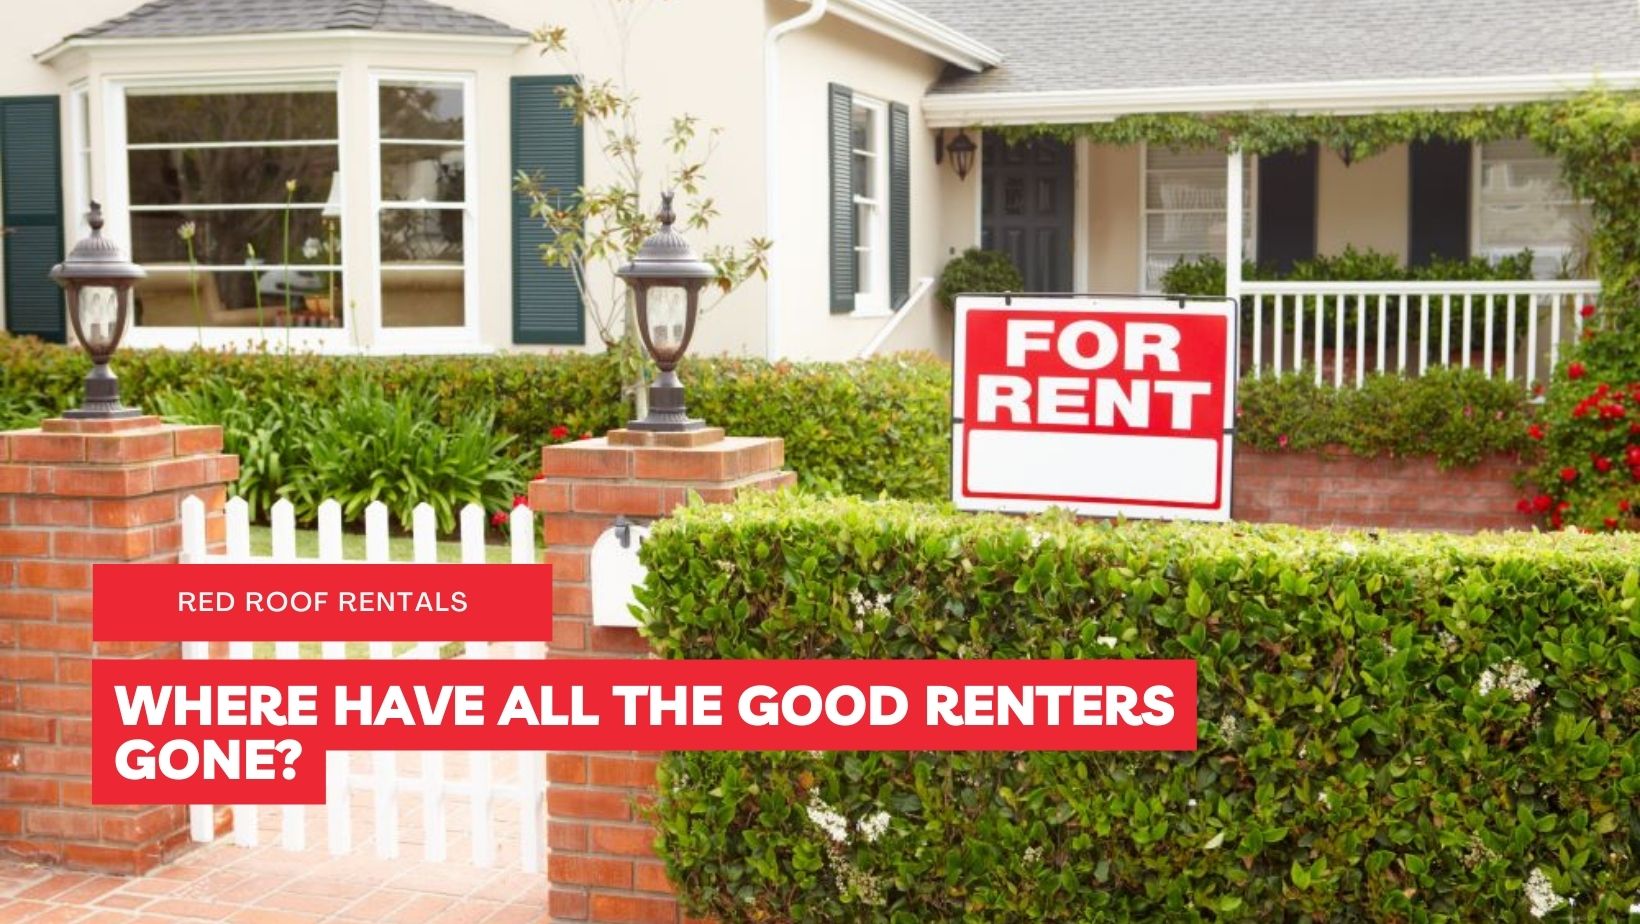 WHERE HAVE ALL THE GOOD RENTERS GONE?